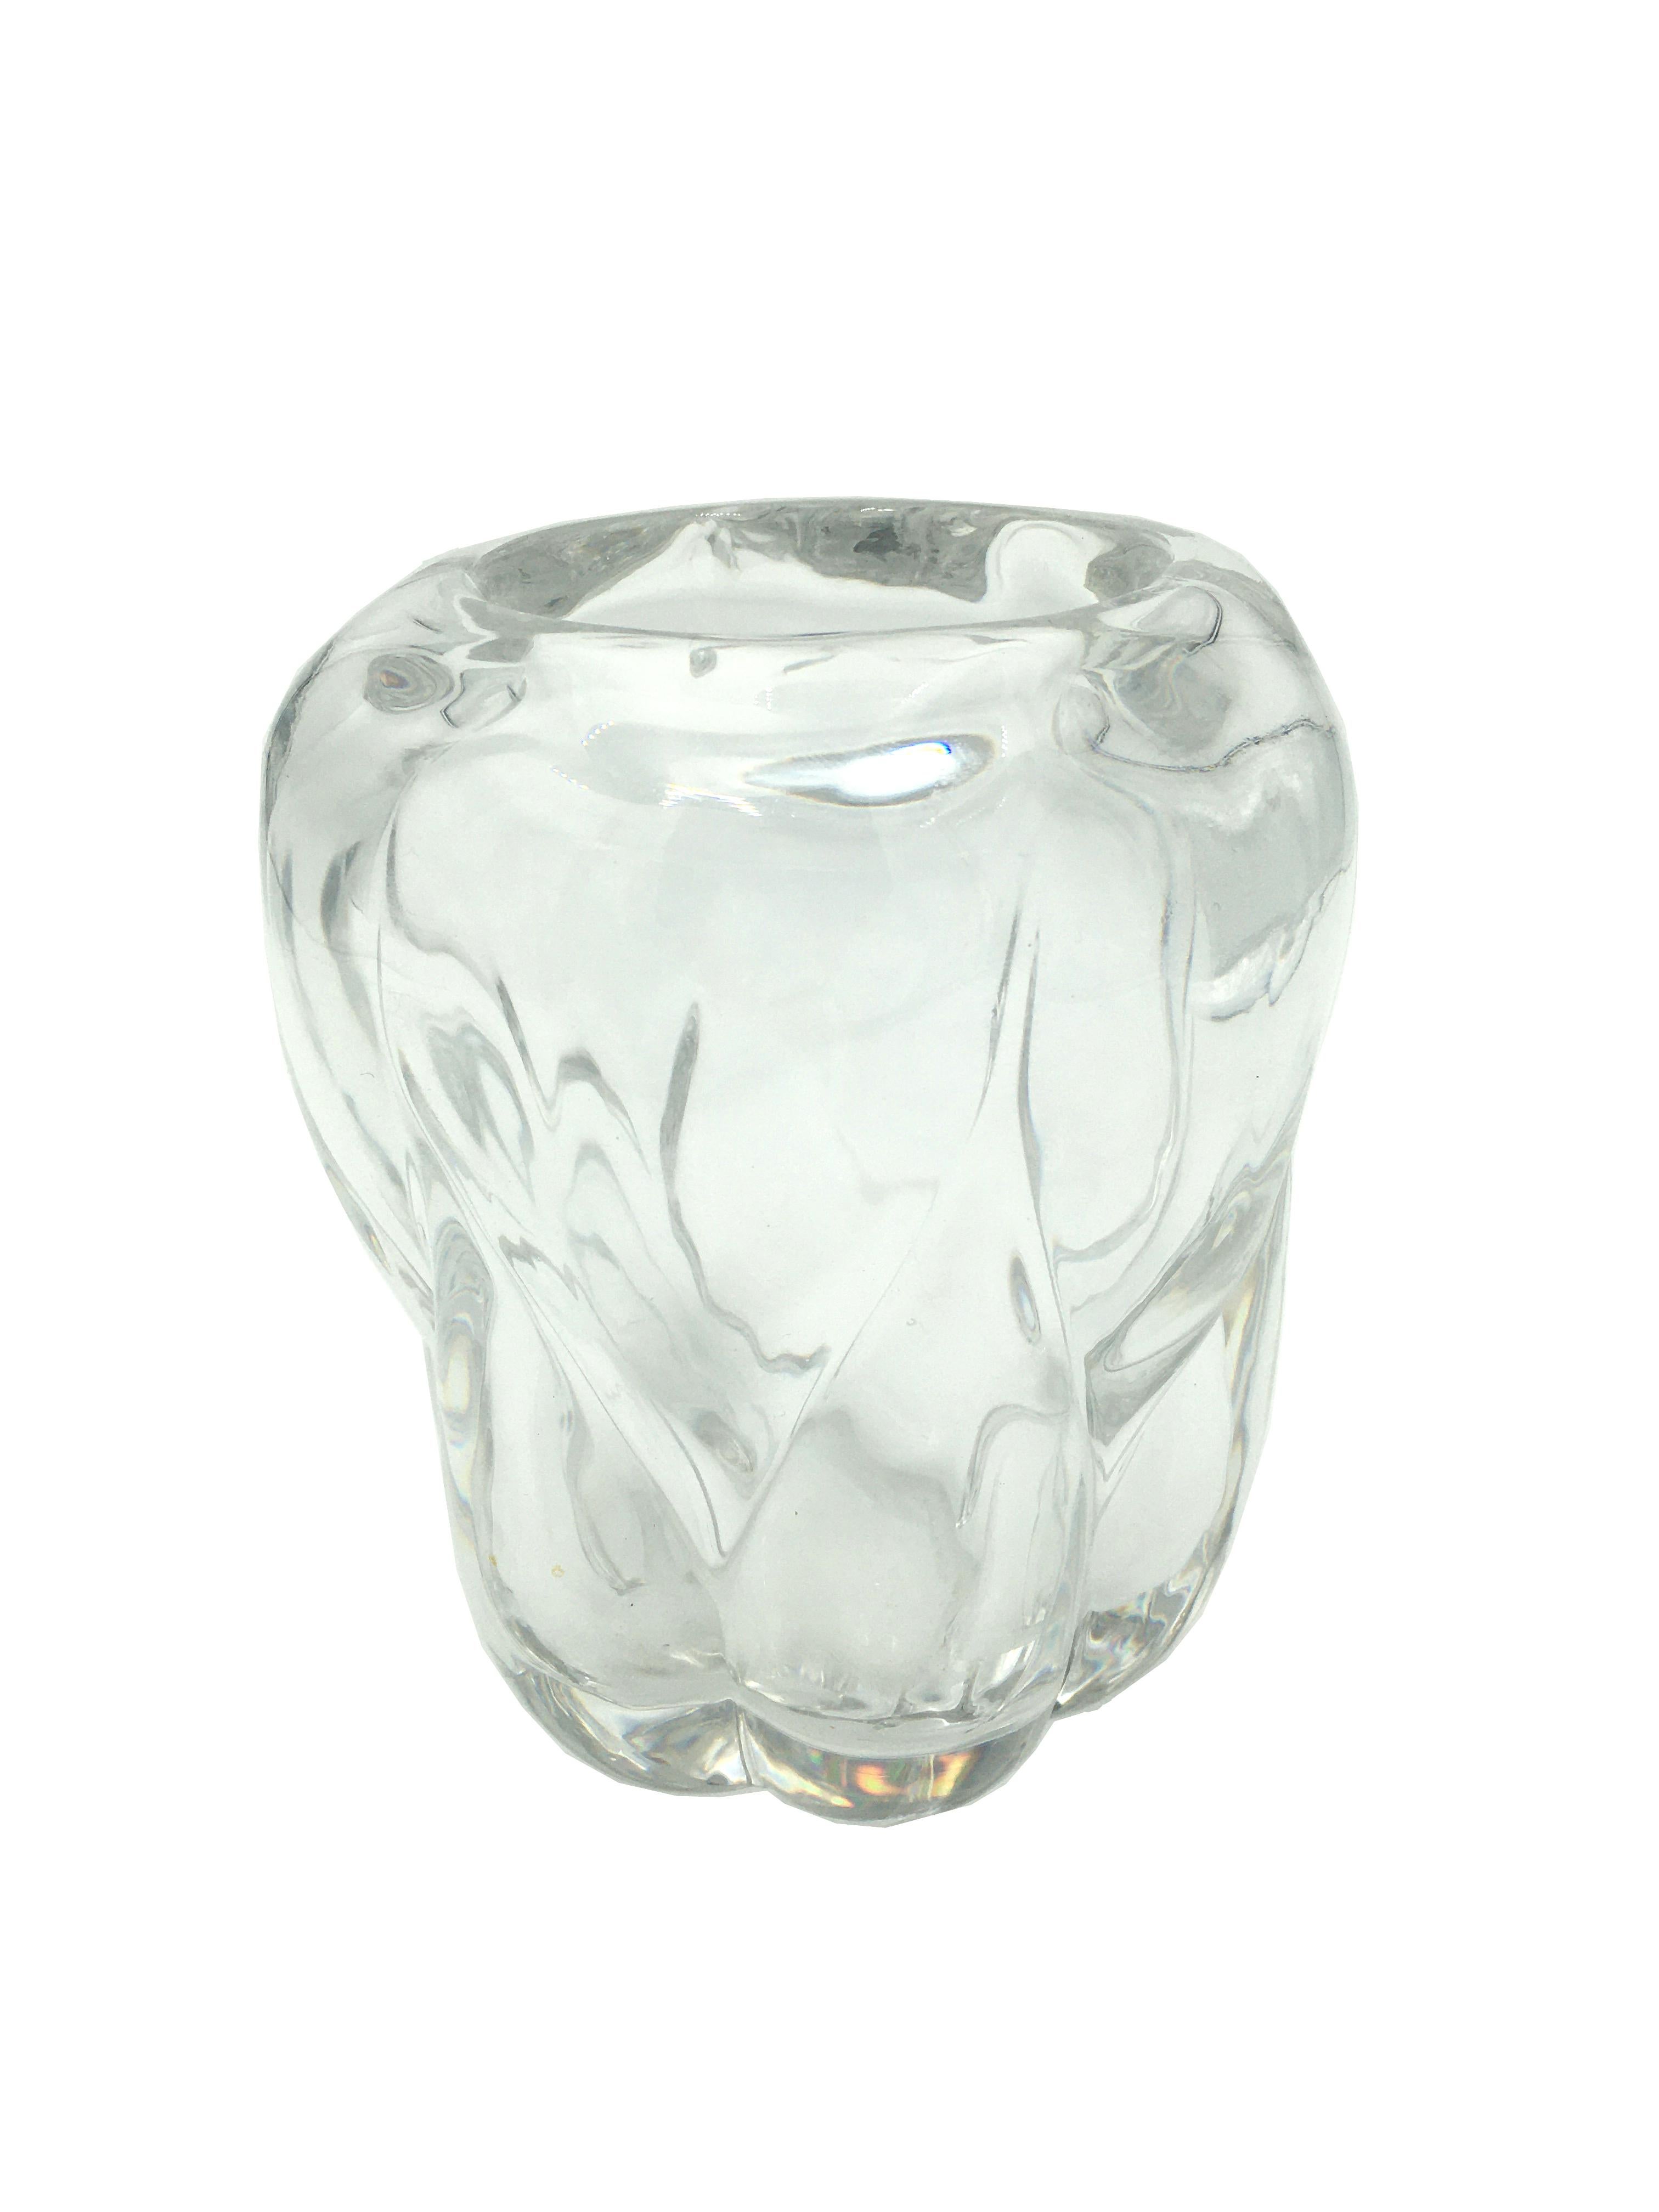 Art Deco Val St Lambert thick clear blown crystal vase. Mark at the bottom. Conditions: Very good. Wear consistent with age and use.
Belgium,
circa 1930.

      